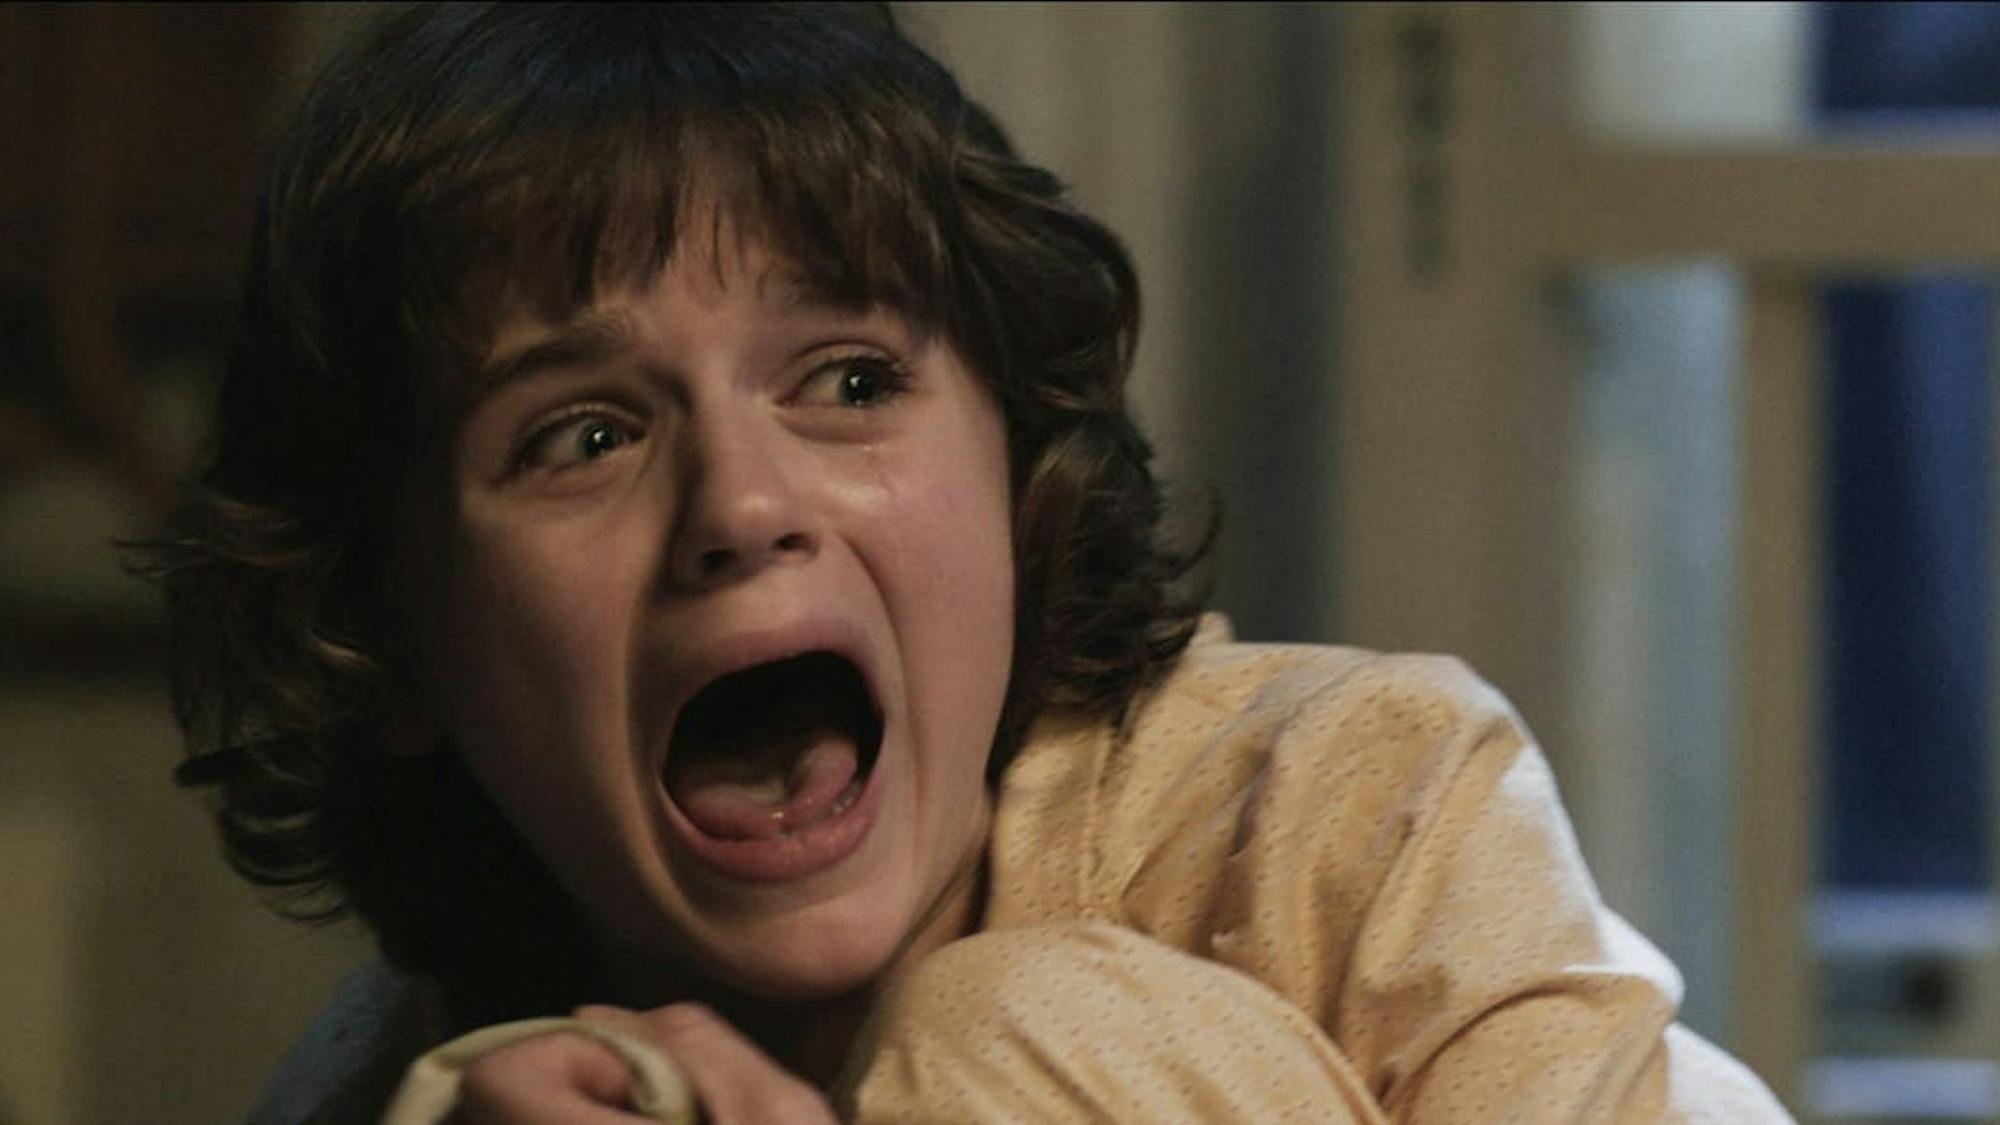 Christine (Joey King) in The Conjuring (2013). With her mouth open wide, she clutches her legs to her body in fear.